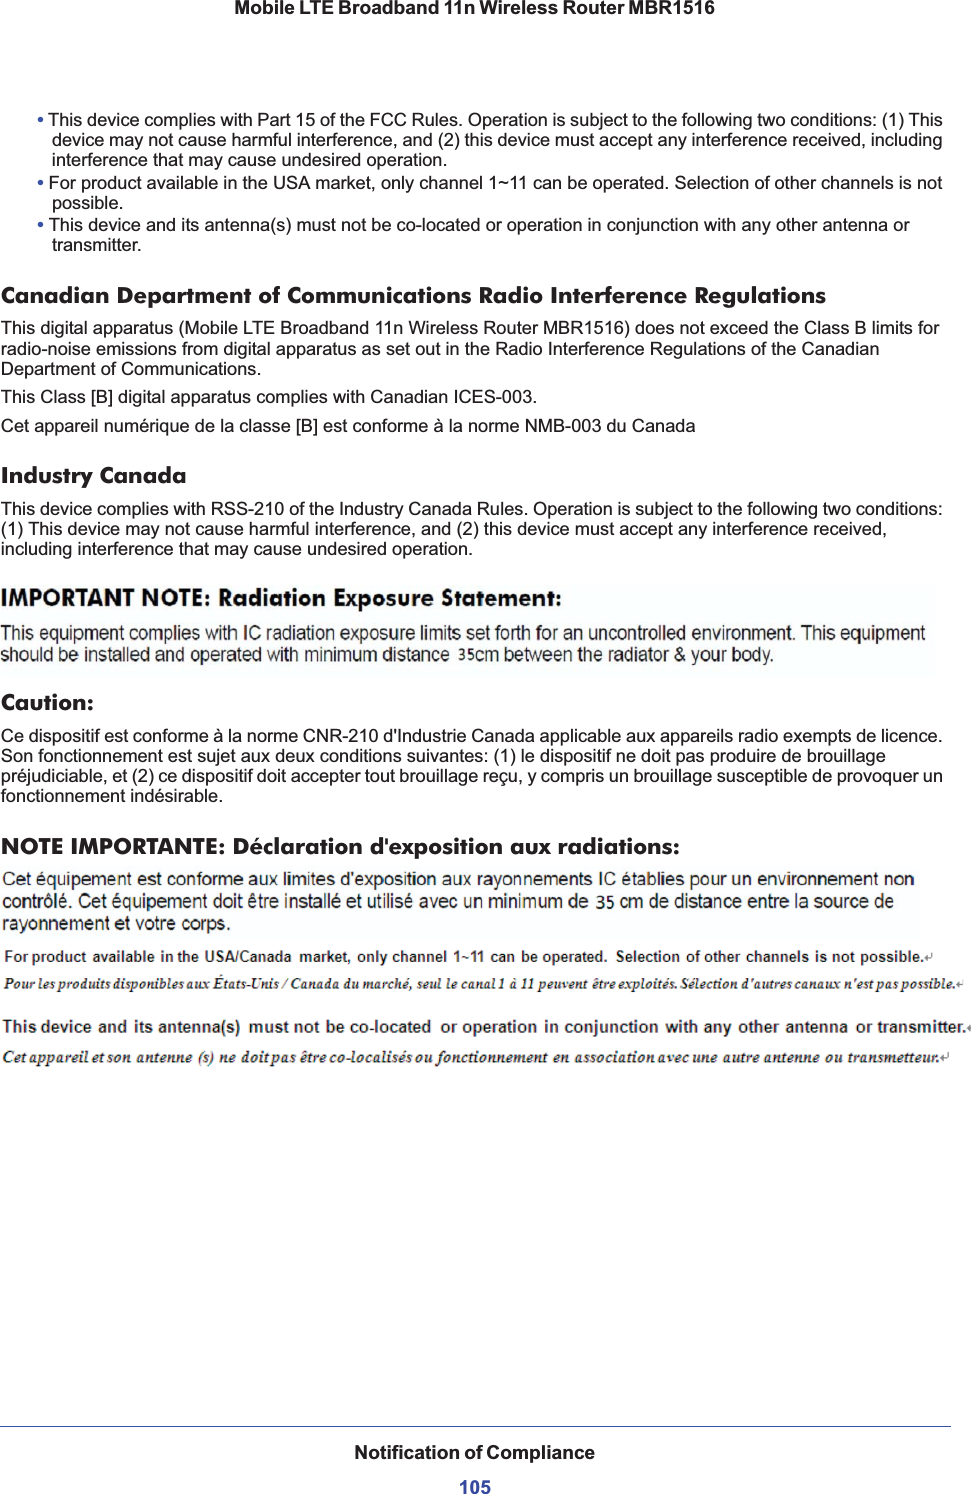 Notification of Compliance105Mobile LTE Broadband 11n Wireless Router MBR1516•This device complies with Part 15 of the FCC Rules. Operation is subject to the following two conditions: (1) This device may not cause harmful interference, and (2) this device must accept any interference received, including interference that may cause undesired operation. •For product available in the USA market, only channel 1~11 can be operated. Selection of other channels is not possible.•This device and its antenna(s) must not be co-located or operation in conjunction with any other antenna or transmitter.Canadian Department of Communications Radio Interference RegulationsThis digital apparatus (Mobile LTE Broadband 11n Wireless Router MBR1516) does not exceed the Class B limits for radio-noise emissions from digital apparatus as set out in the Radio Interference Regulations of the Canadian Department of Communications.This Class [B] digital apparatus complies with Canadian ICES-003.Cet appareil numérique de la classe [B] est conforme à la norme NMB-003 du CanadaIndustry CanadaThis device complies with RSS-210 of the Industry Canada Rules. Operation is subject to the following two conditions: (1) This device may not cause harmful interference, and (2) this device must accept any interference received, including interference that may cause undesired operation.IMPORTANT NOTE: Radiation Exposure Statement:This equipment complies with IC radiation exposure limits set forth for an uncontrolled environment. This equipment should be installed and operated with minimum distance 20cm between the radiator &amp; your body.Caution:Ce dispositif est conforme à la norme CNR-210 d&apos;Industrie Canada applicable aux appareils radio exempts de licence. Son fonctionnement est sujet aux deux conditions suivantes: (1) le dispositif ne doit pas produire de brouillage préjudiciable, et (2) ce dispositif doit accepter tout brouillage reçu, y compris un brouillage susceptible de provoquer un fonctionnement indésirable.NOTE IMPORTANTE: Déclaration d&apos;exposition aux radiations:Cet équipement est conforme aux limites d&apos;exposition aux rayonnements IC établies pour un environnement non contrôlé. Cet équipement doit être installé et utilisé avec un minimum de 20 cm de distance entre la source de rayonnement et votre corps.